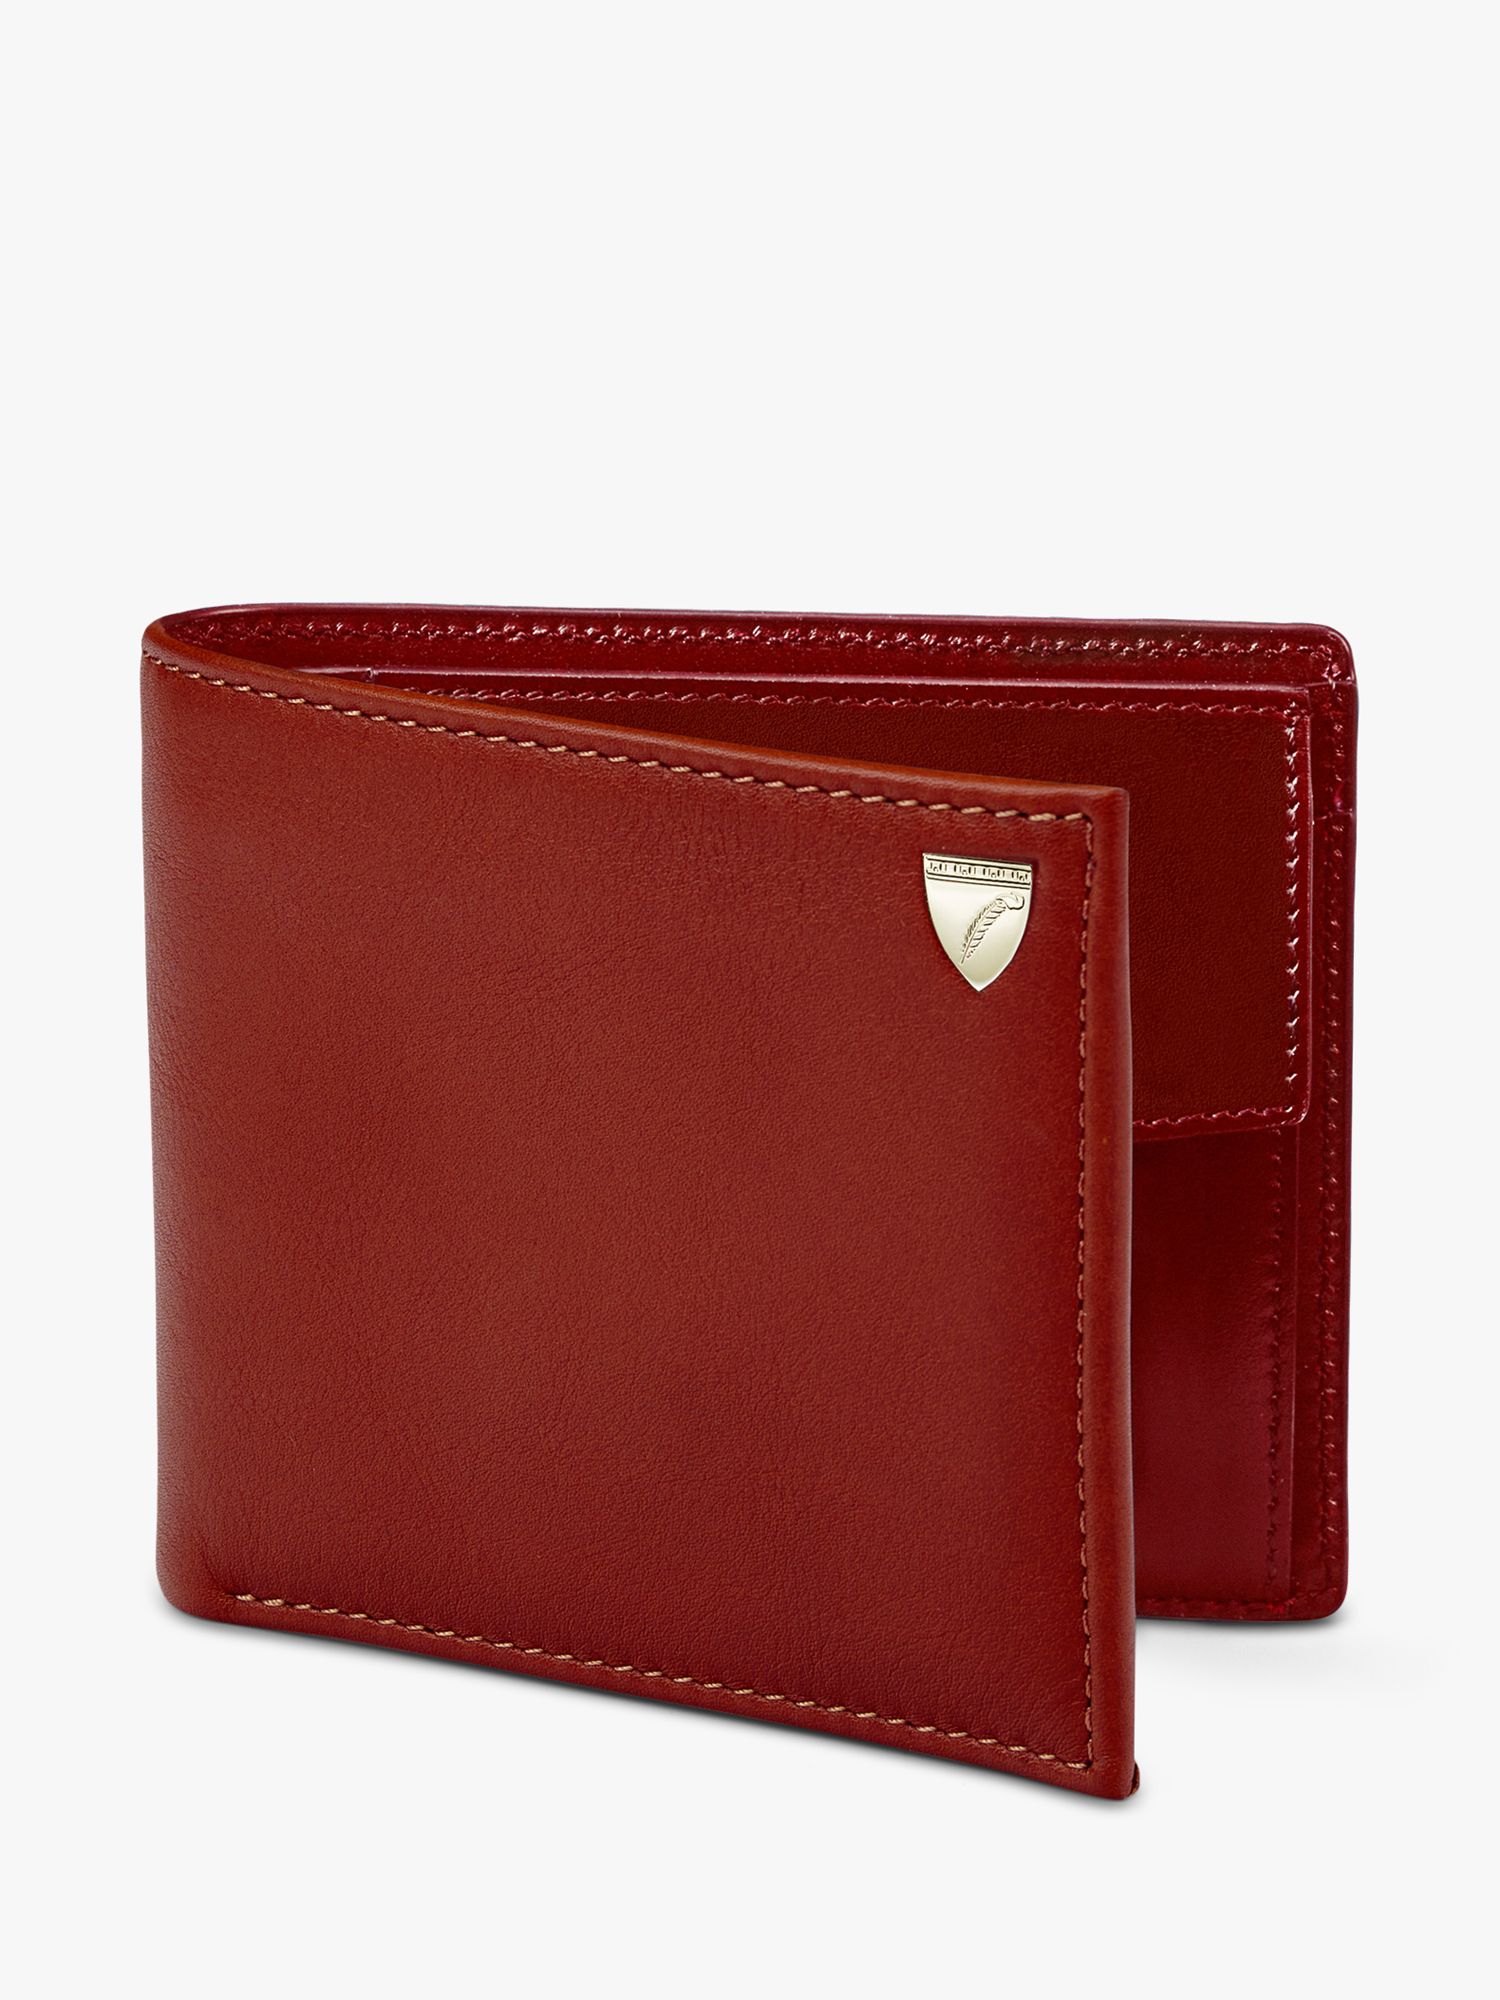 Aspinal of London Single Billfold Smooth Leather Coin Wallet, Cognac at ...